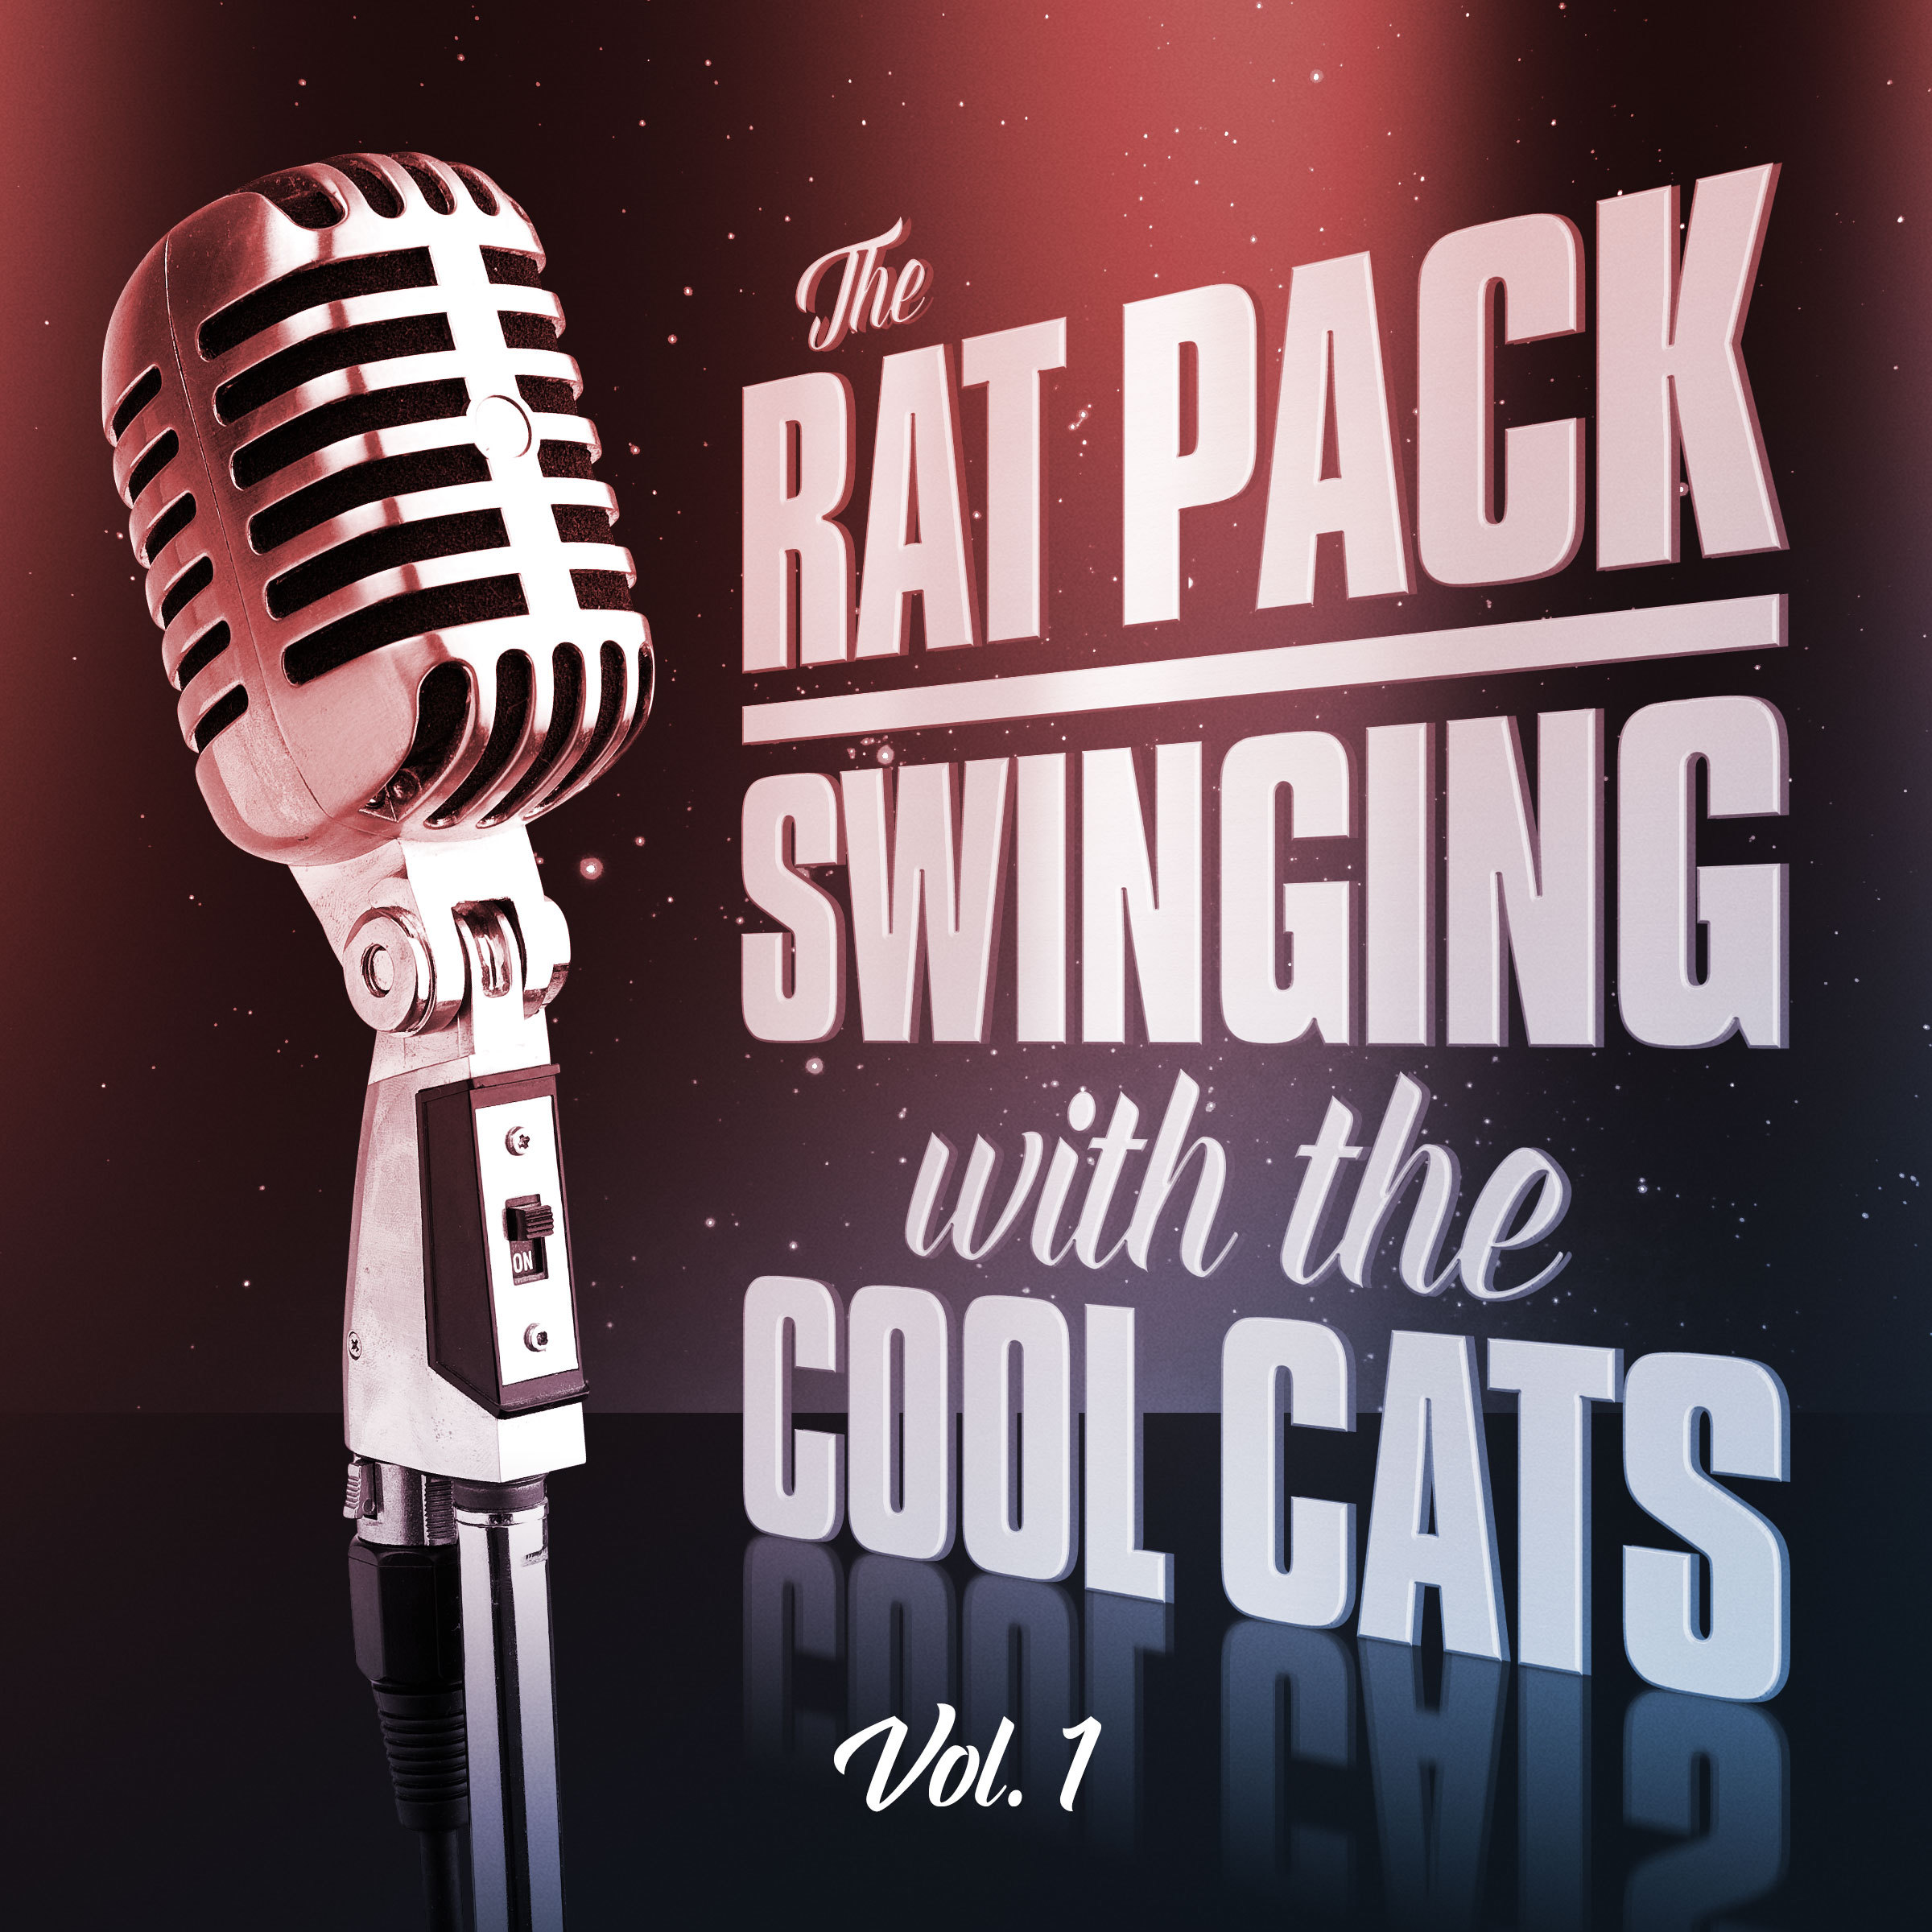 The Rat Pack: Swinging with the Cool Cats Vol. 1